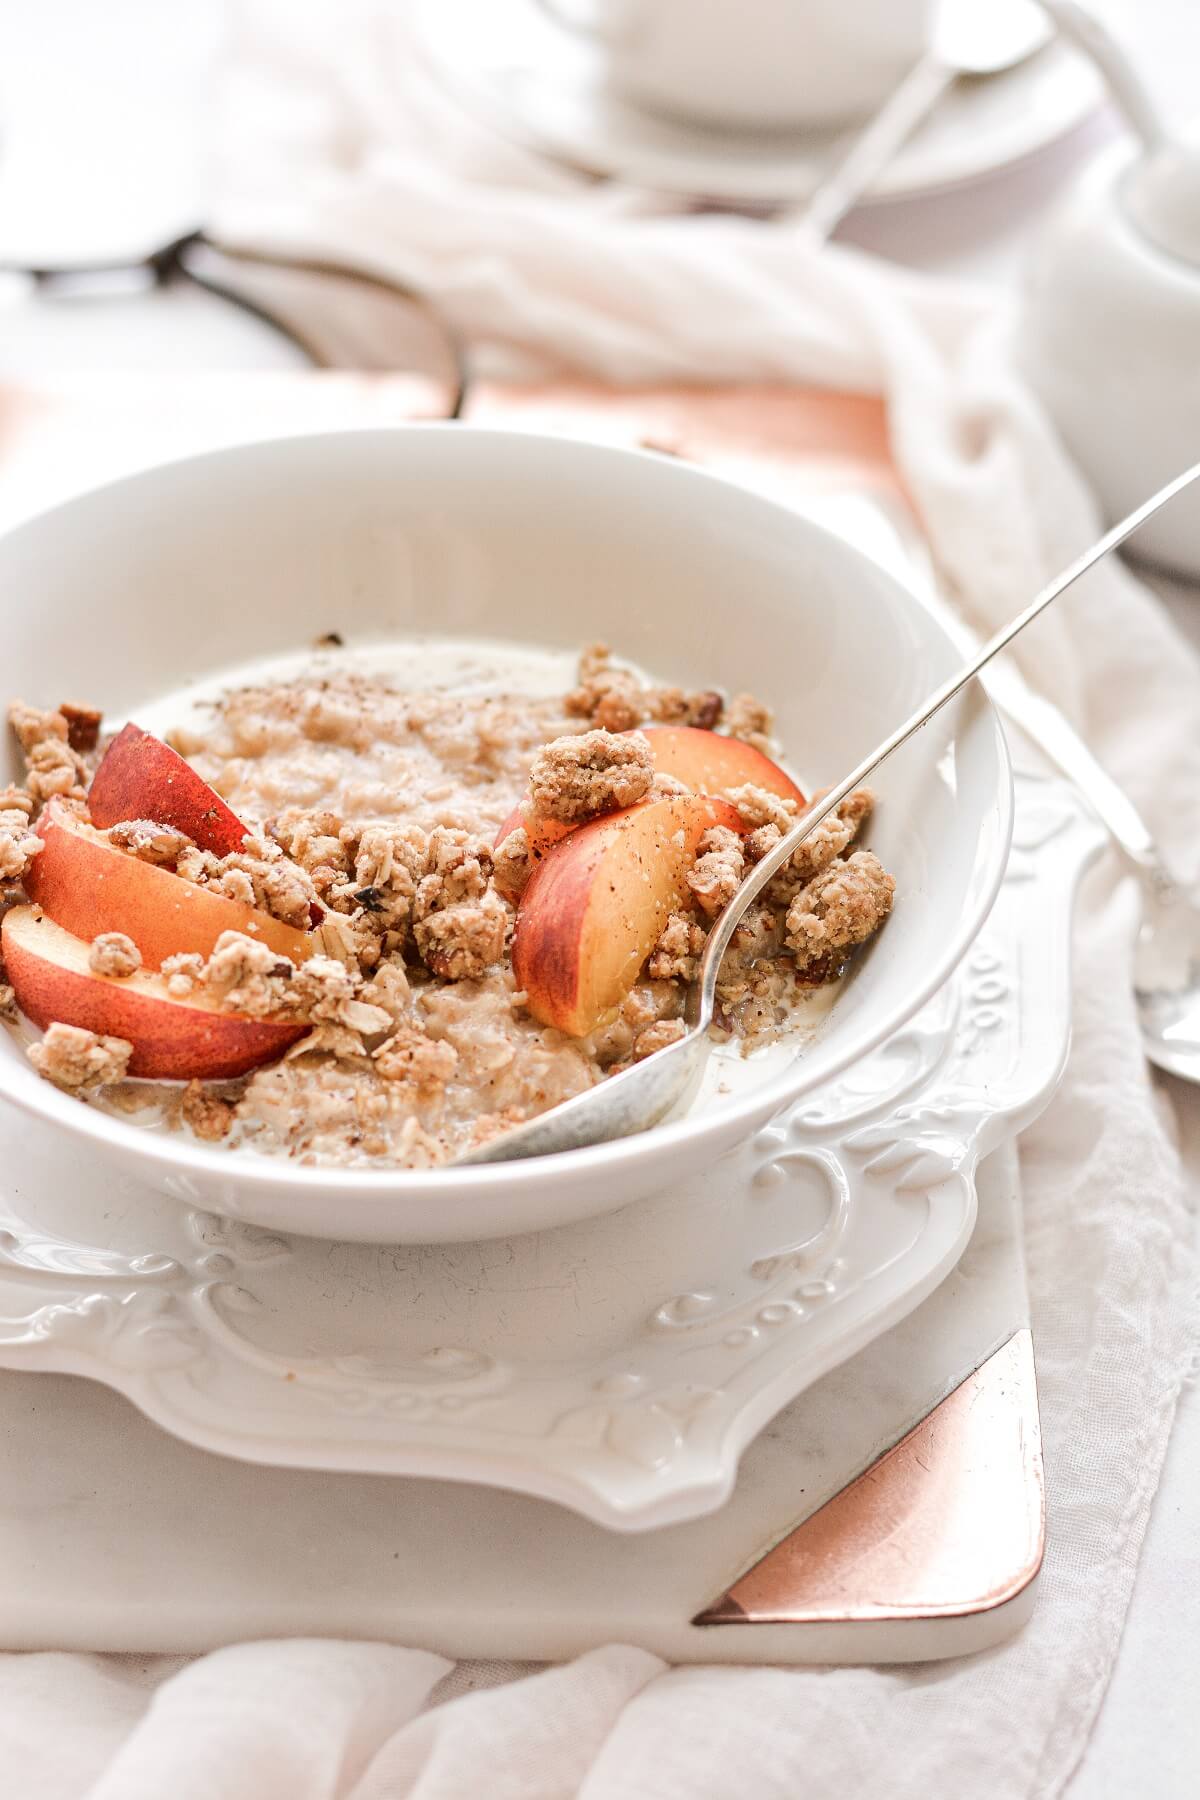 A bowl of oatmeal topped with sliced peaches and crumble topping.